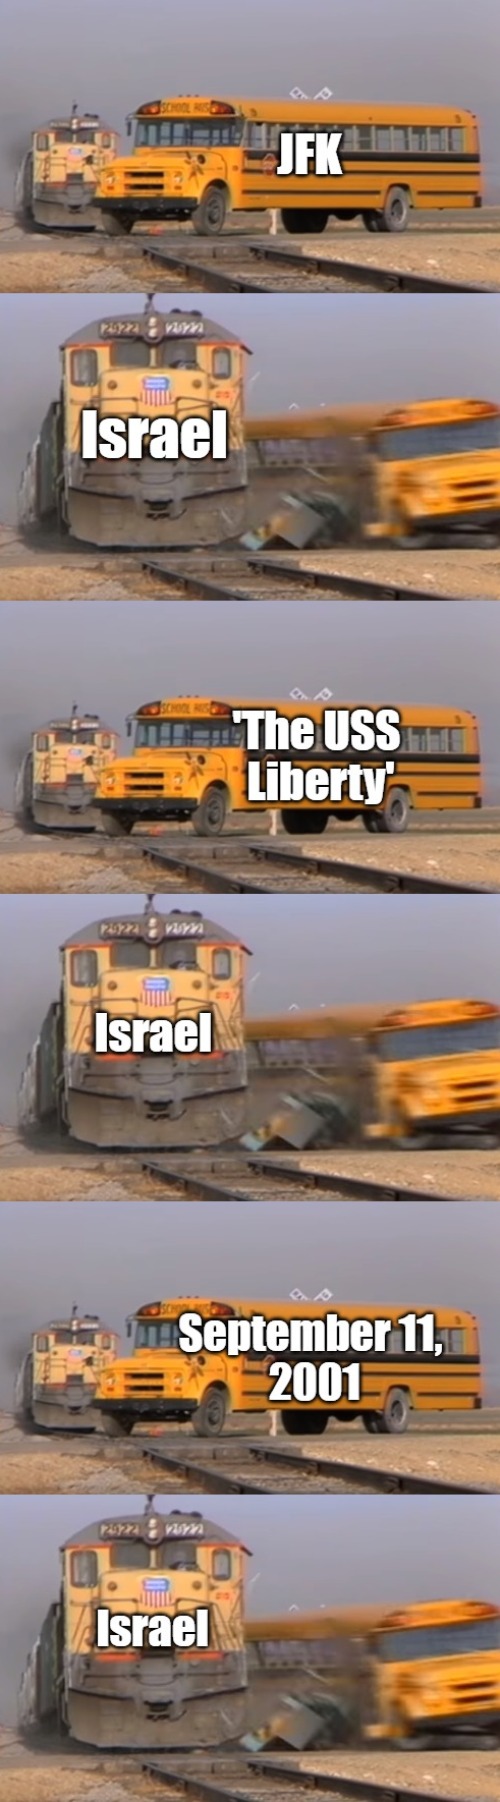 Acts of War from "America's Greatest Ally" | image tagged in jfk,uss liberty,9/11,israel,train crashes bus,america | made w/ Imgflip meme maker